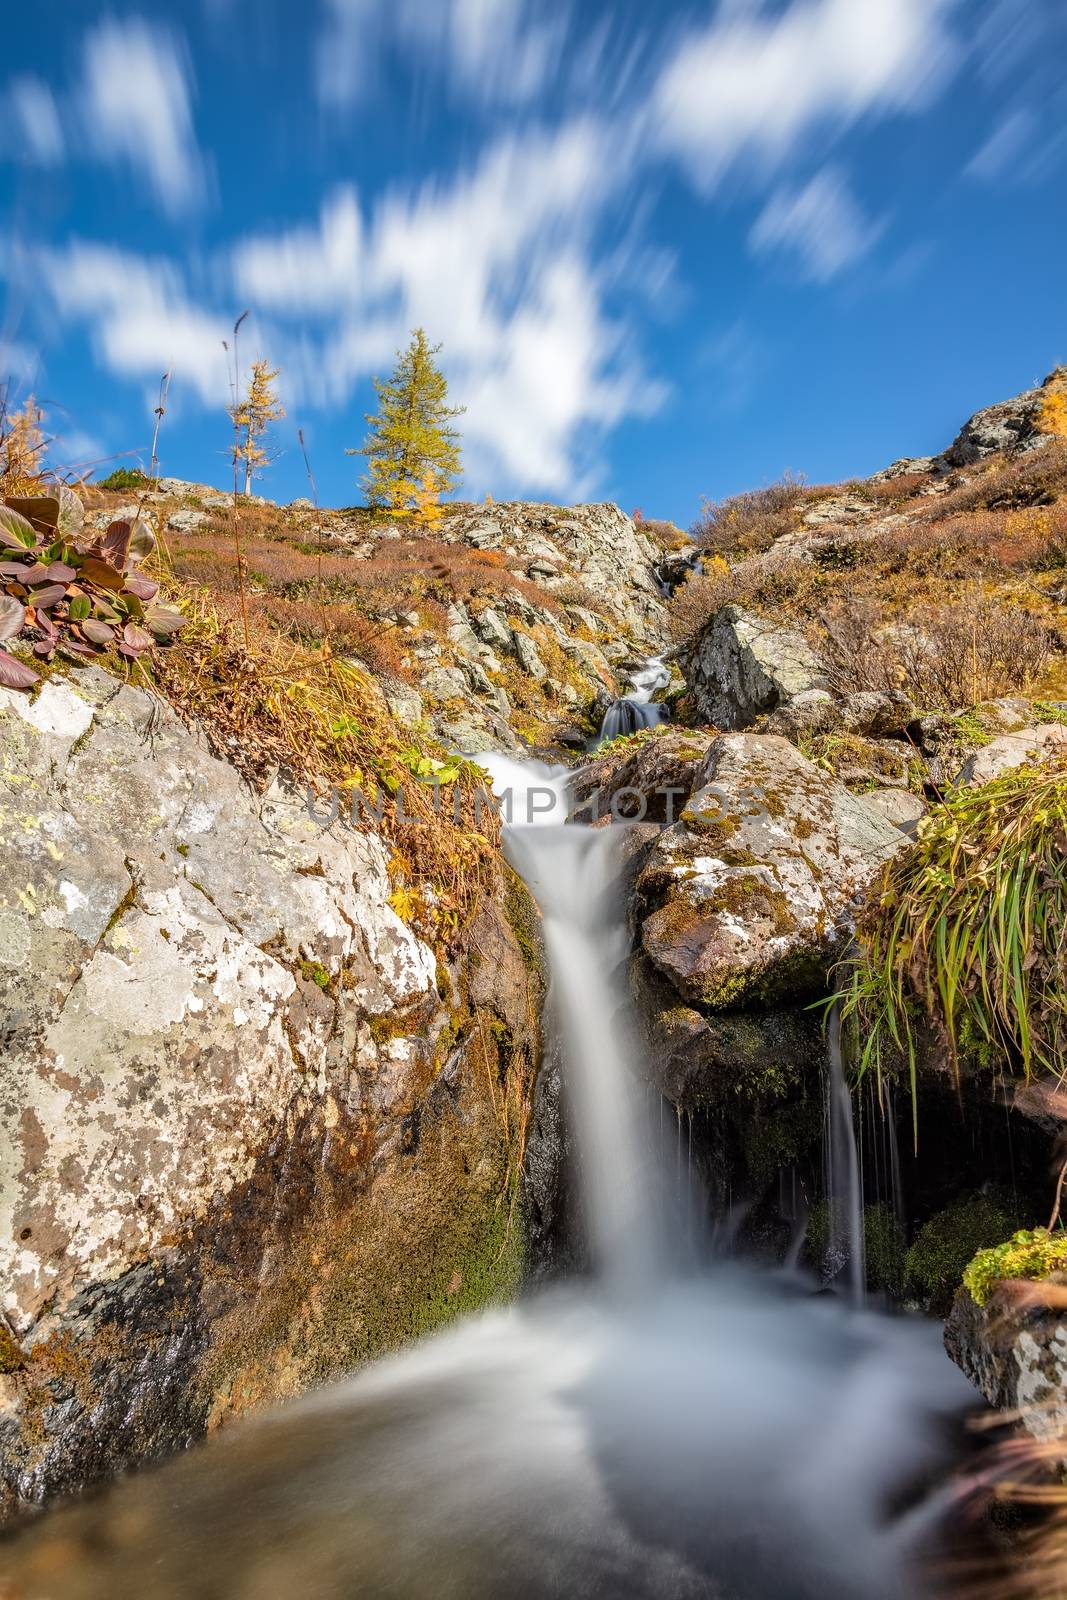 View of a waterfall with smooth water, blue sky and flowing clouds in the background in Altai mountains, Siberia, Russia. Fall 2019. Long exposure